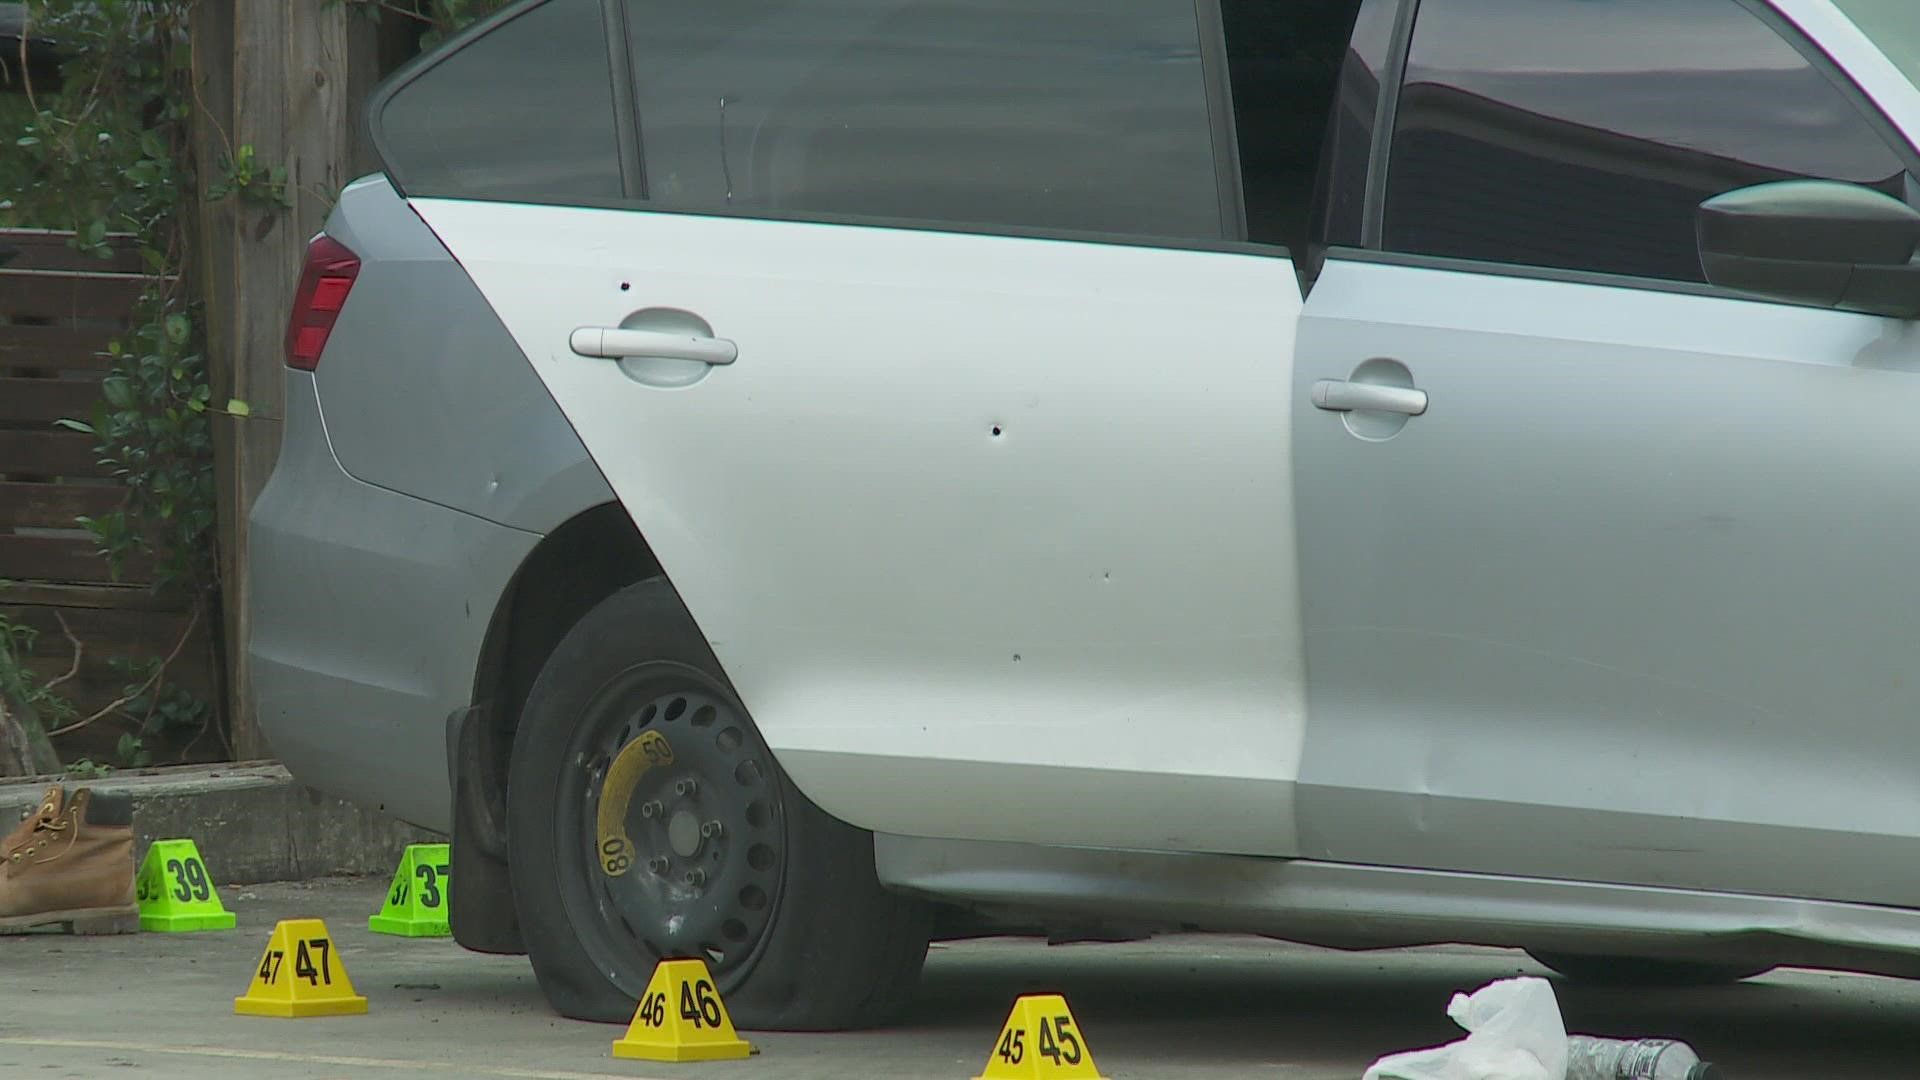 Police are looking for those responsible for the shooting in the city that left one man dead Wednesday afternoon.